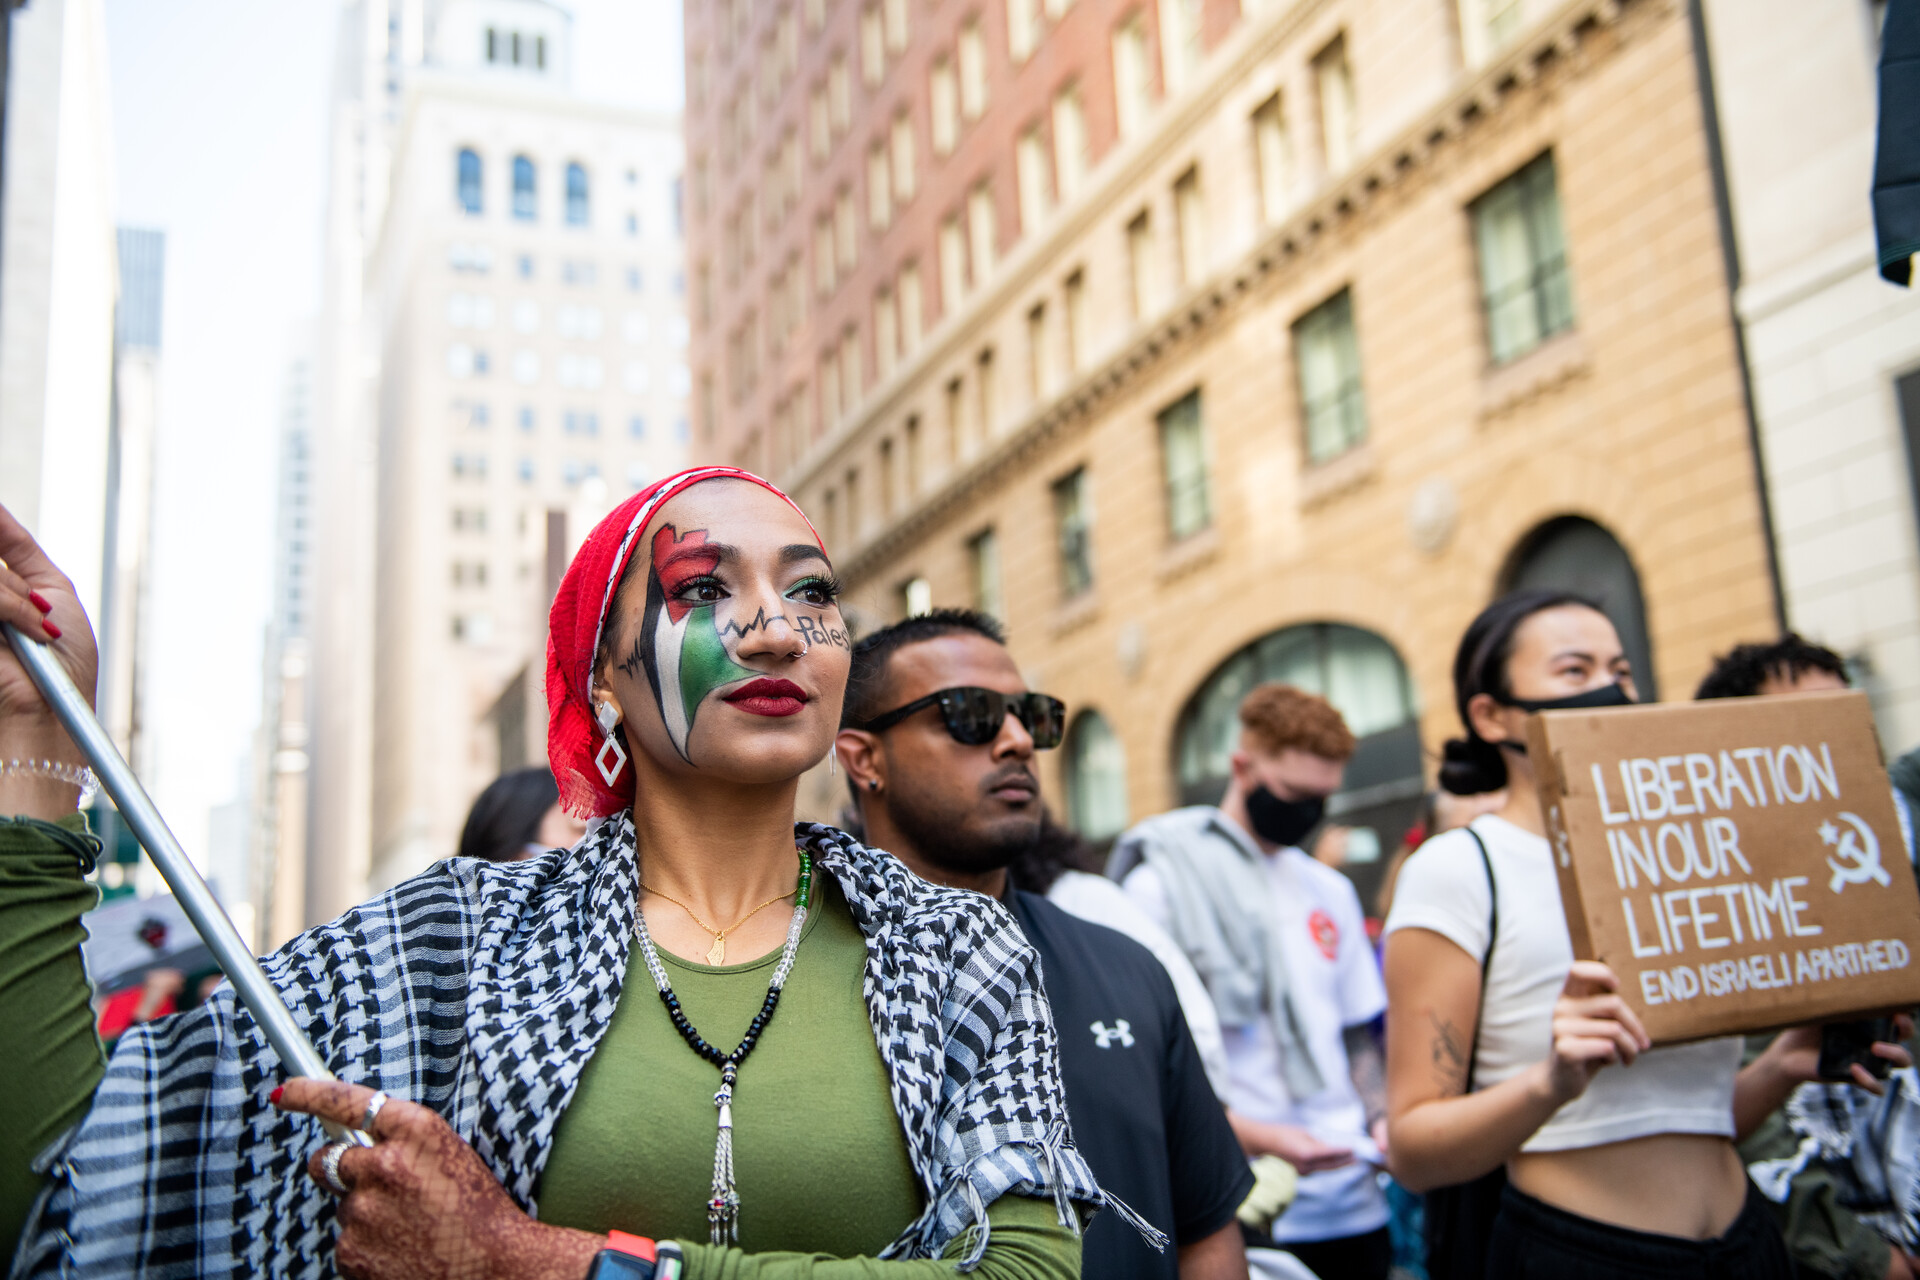 Safa Choudhury holds a Palestinian flag during a rally outside of the Israeli Consulate in San Francisco on May 18, 2021.